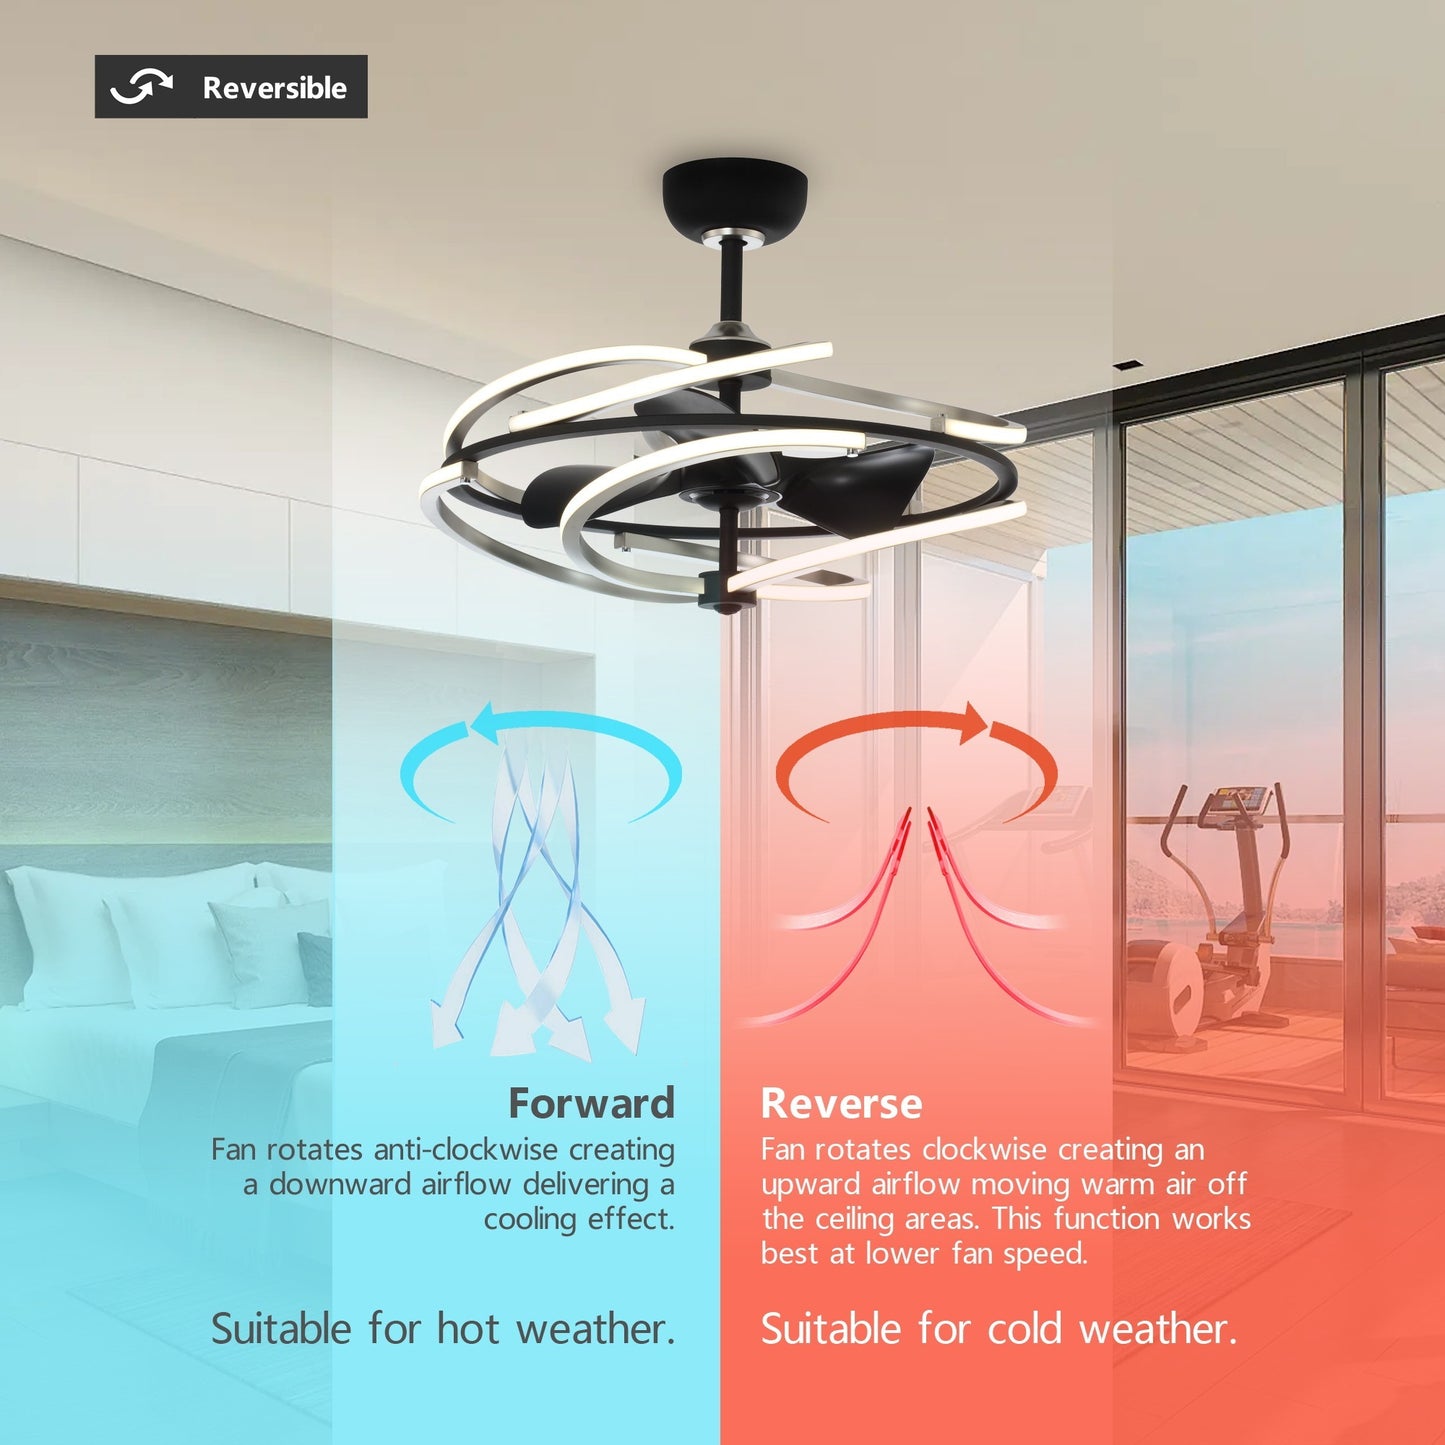 56W LED Light Strip Ceiling Fan with Double Color Frame - 28.3 in.